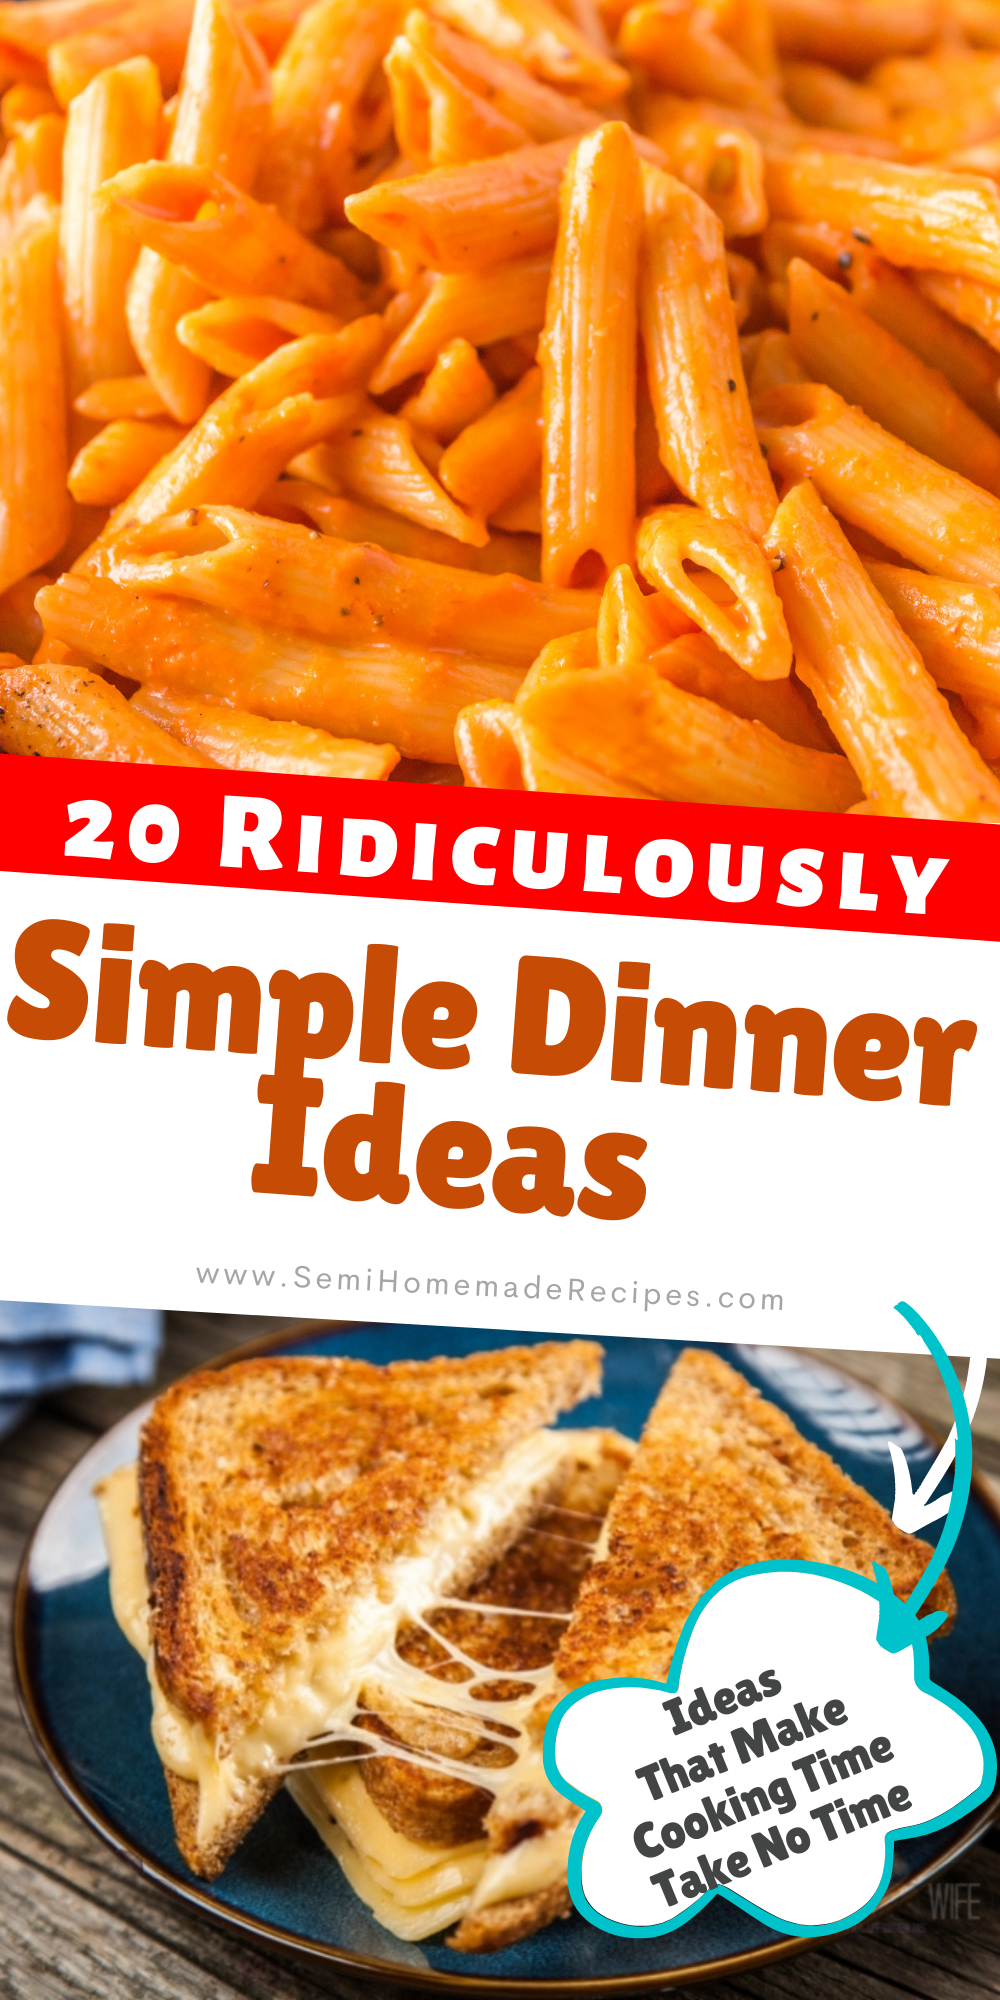 Wondering what to make for dinner tonight? Tired and Uninspired in the kitchen? Just ready to get food on the table? Let me help with 20 Ridiculously Simple Dinner Ideas to make Meal Time Super Easy! Here you'll find the "Semi Homemade Ideas" and "homemade recipes for when you feel like cooking".